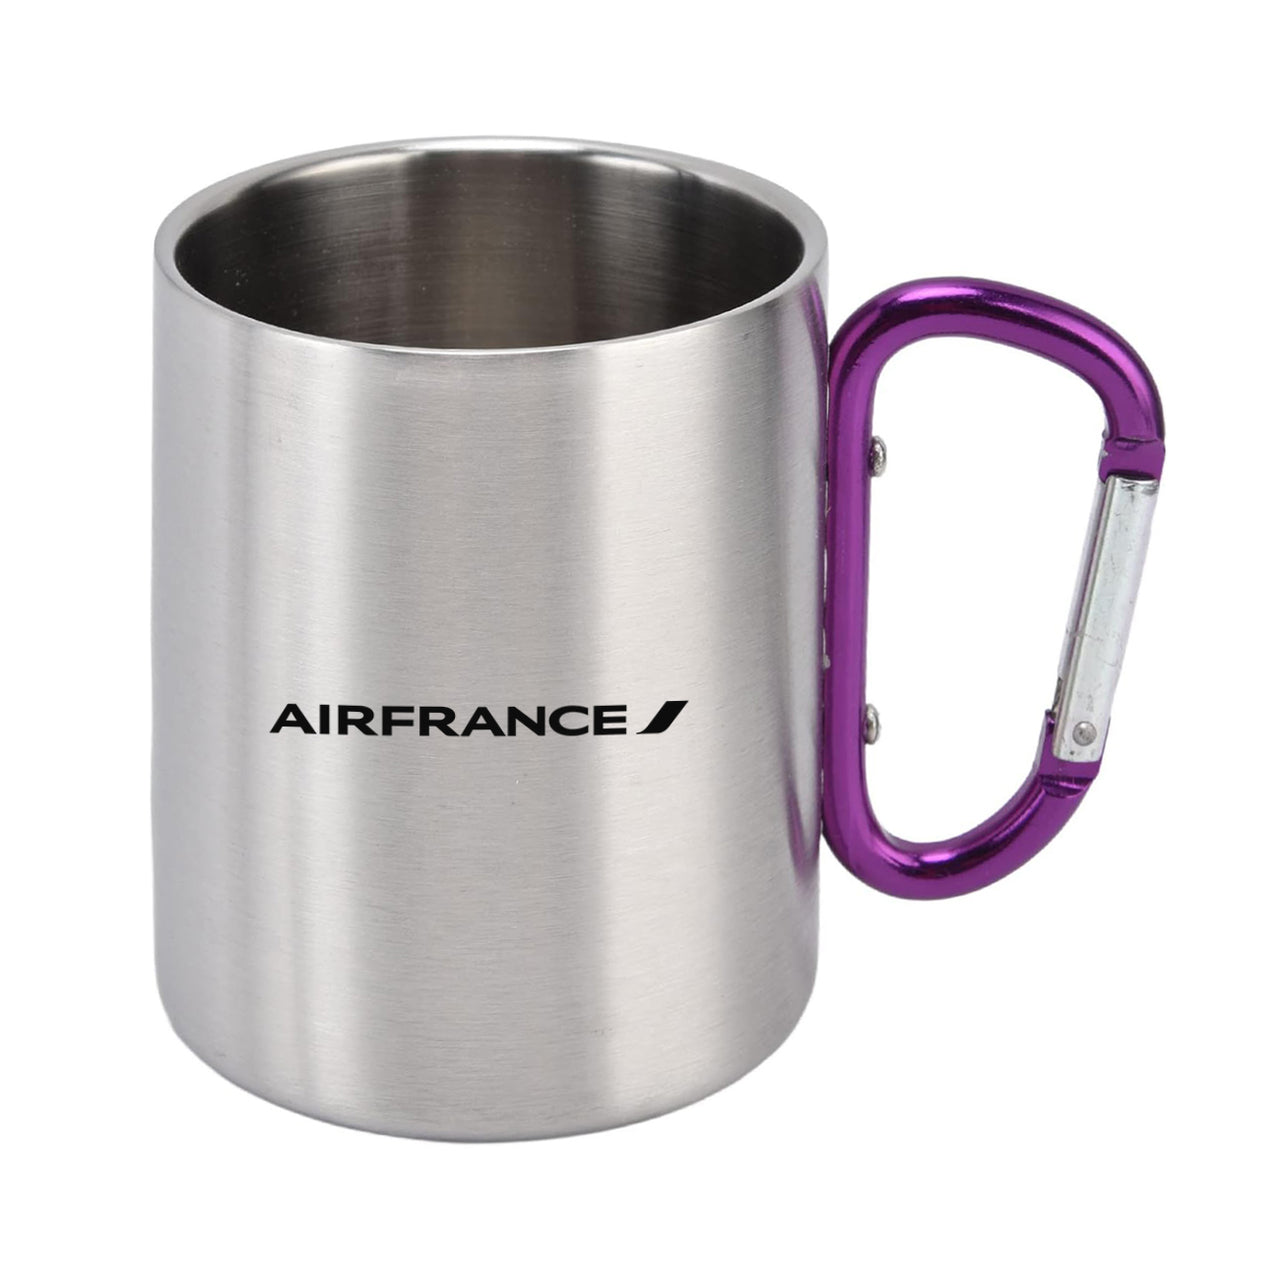 Air France Airlines Designed Stainless Steel Outdoors Mugs